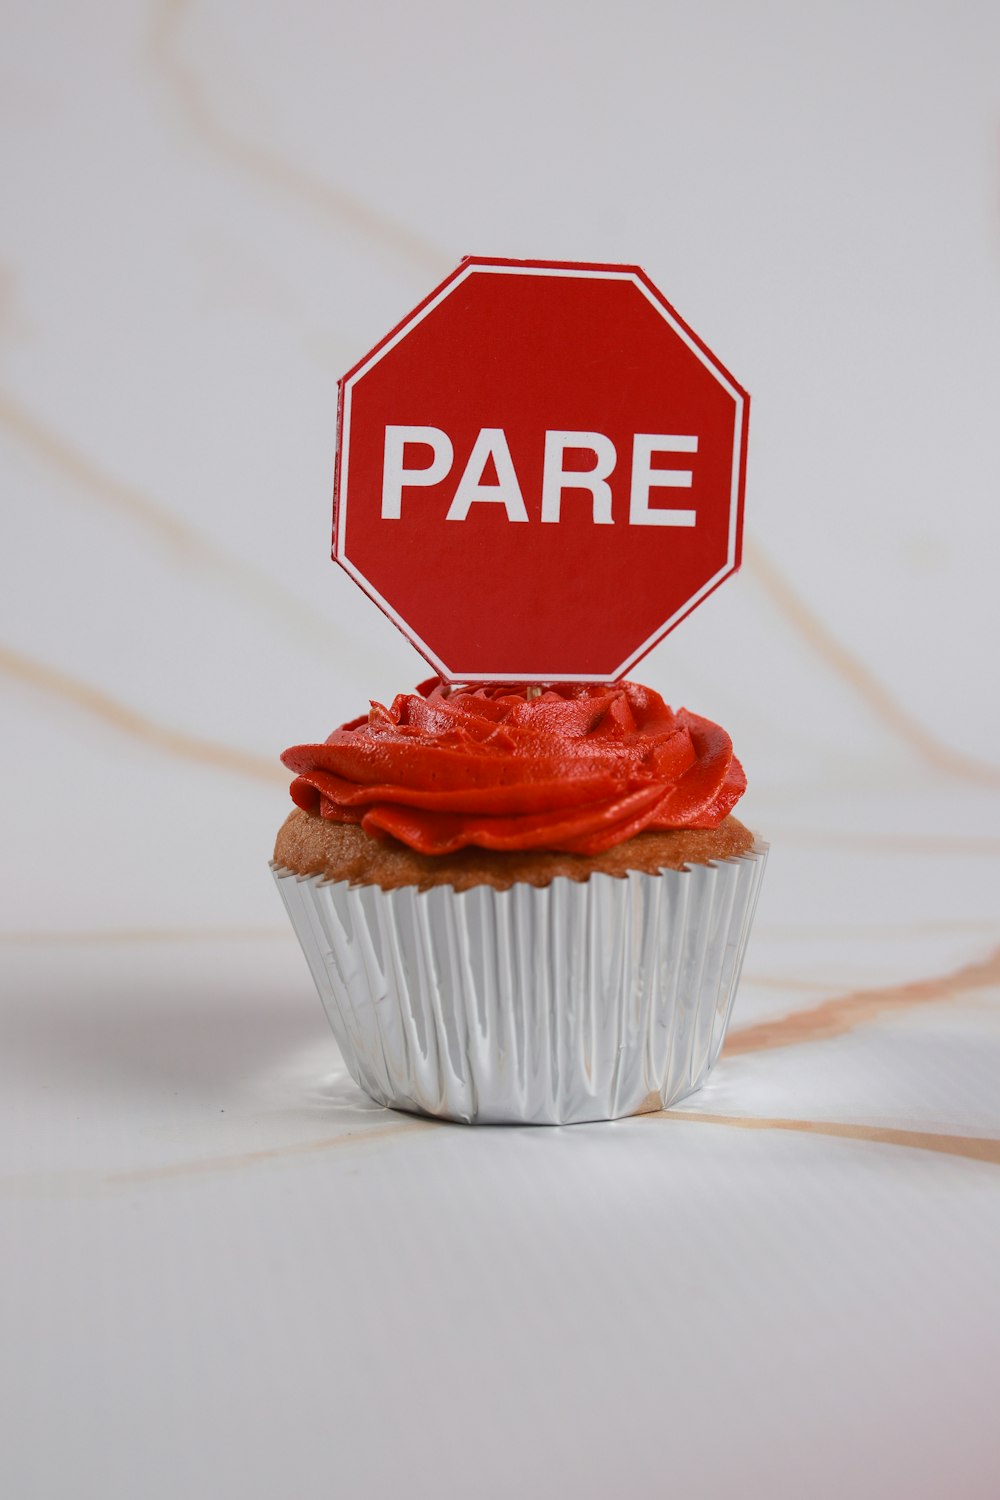 a cupcake with a red frosting sitting in front of a stop sign